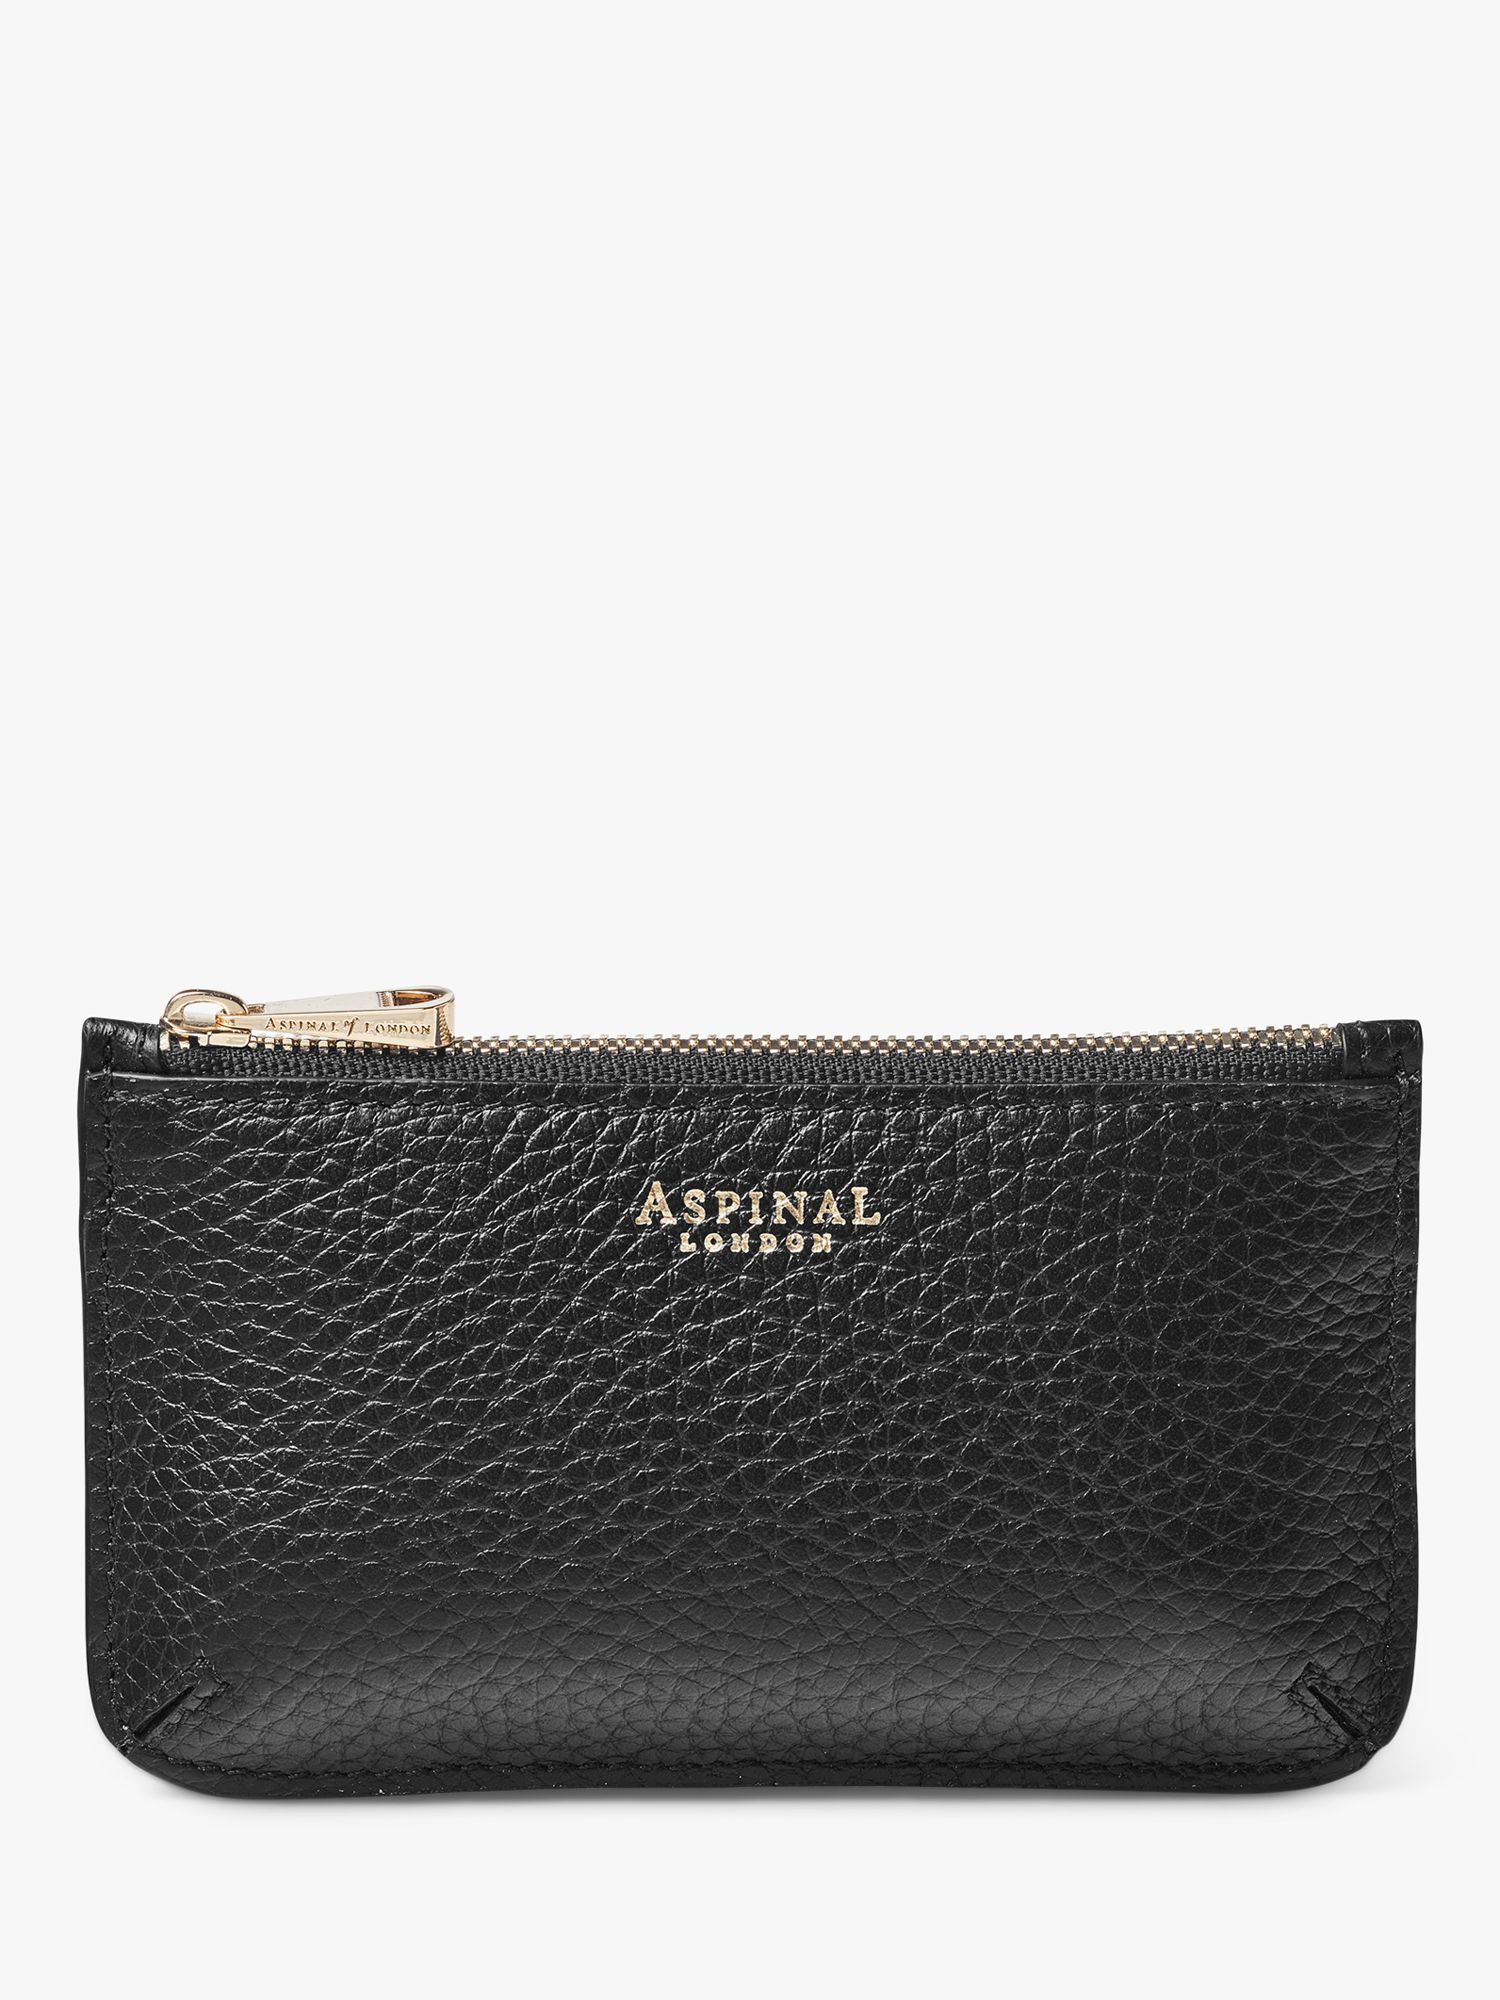 Aspinal of London Ella Pebble Grain Leather Card and Coin Holder, Black ...